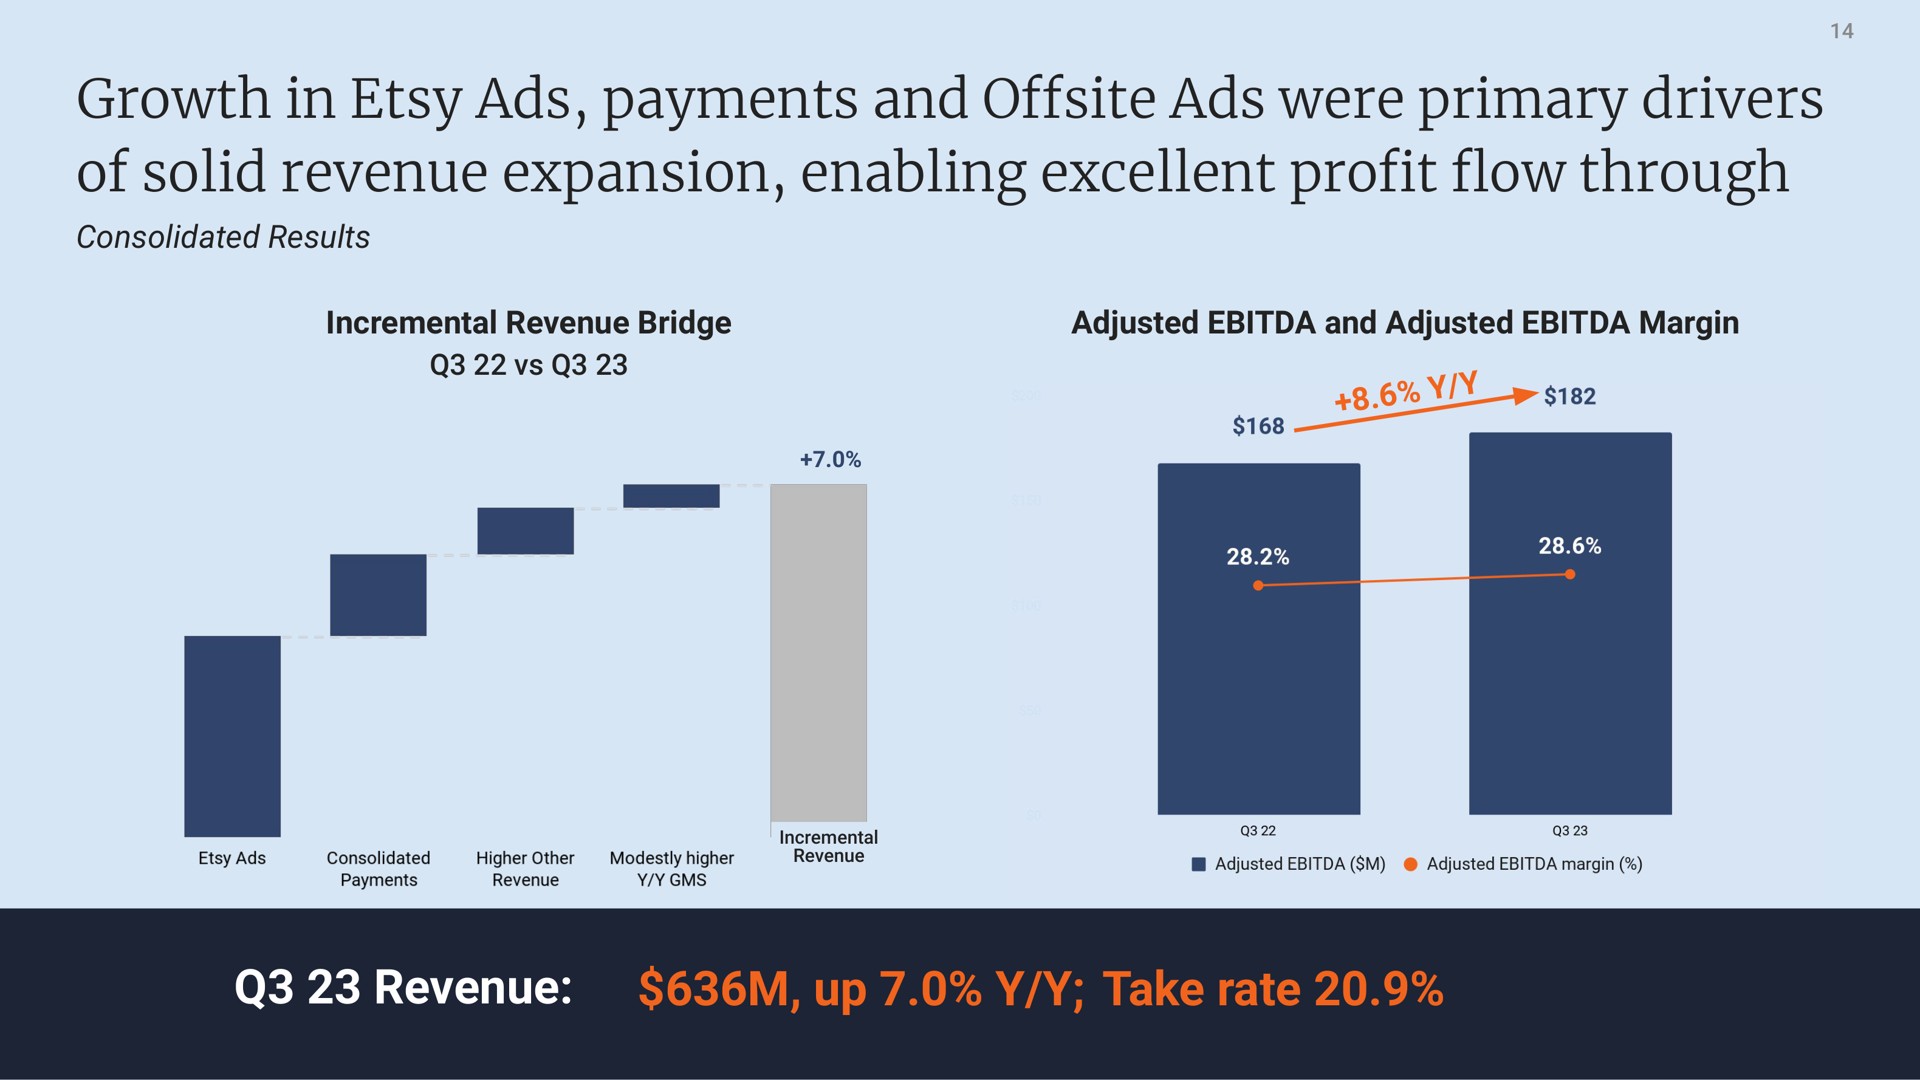 growth in ads payments and ads were primary drivers of solid revenue expansion enabling excellent profit flow through | Etsy